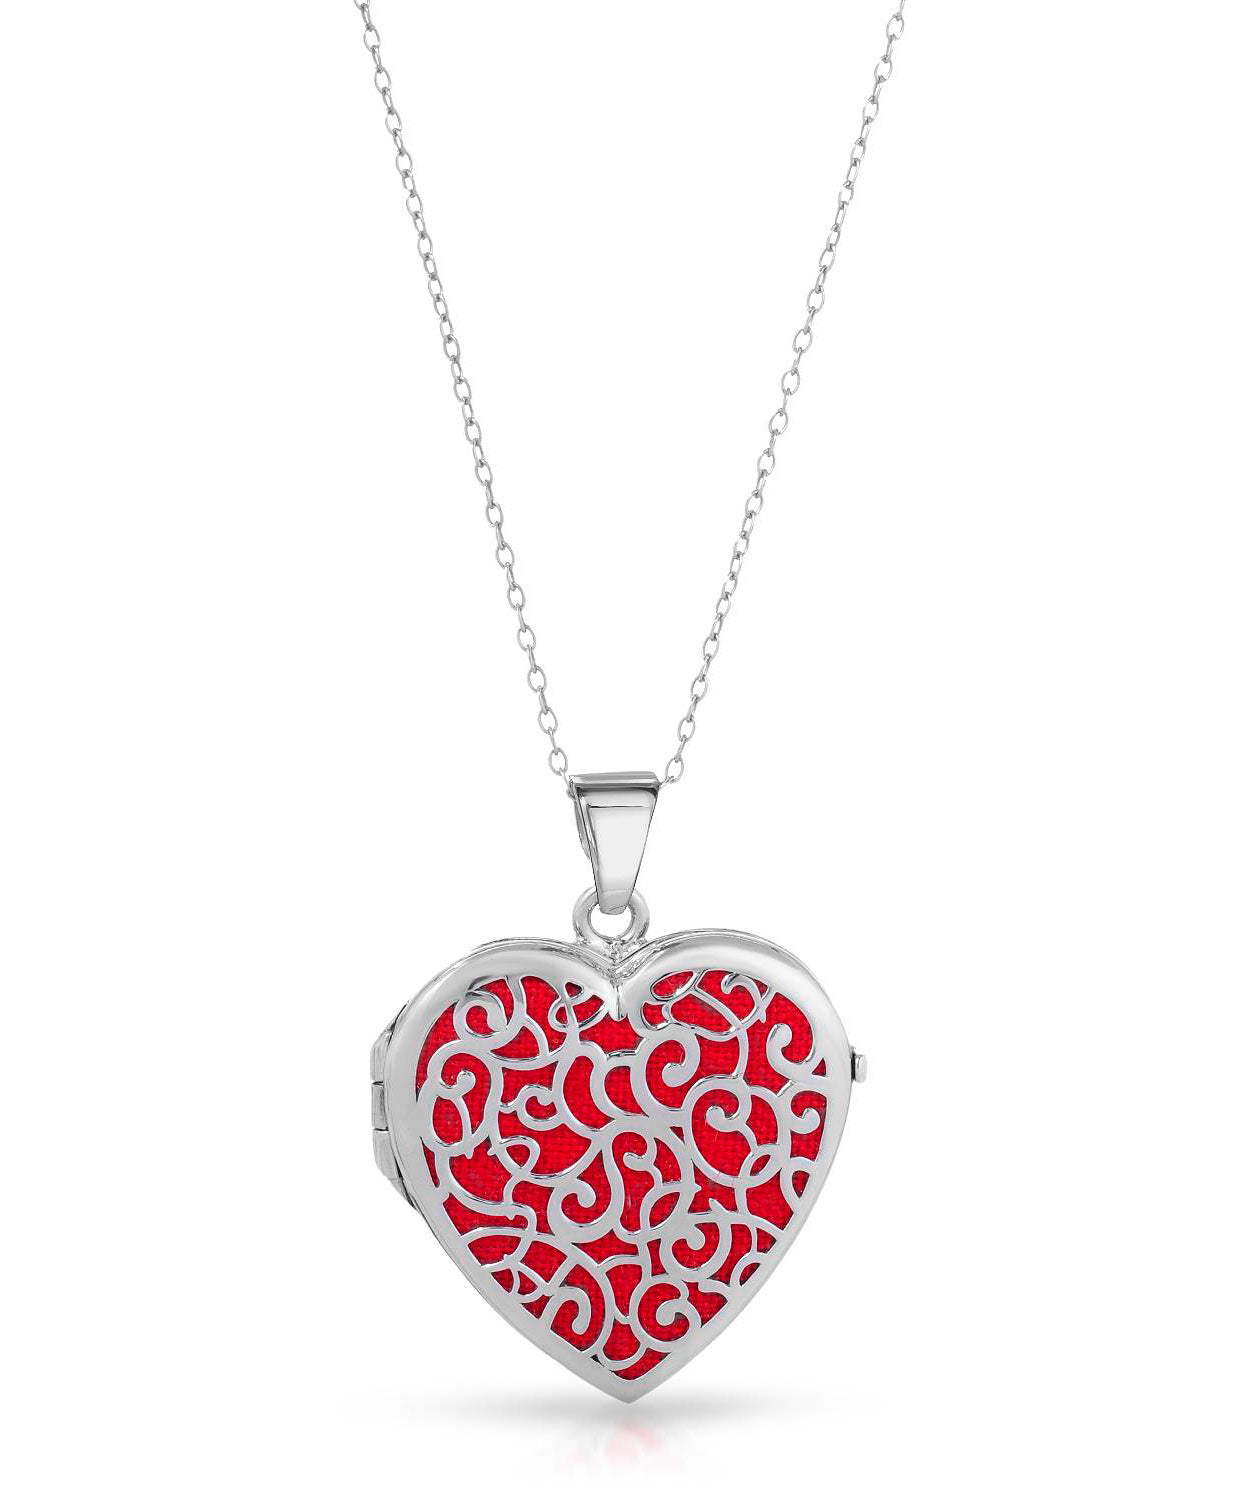 Patterns of Love Collection Rhodium Plated 925 Sterling Silver Heart Locket Pendant With Chain - Made in Italy View 1